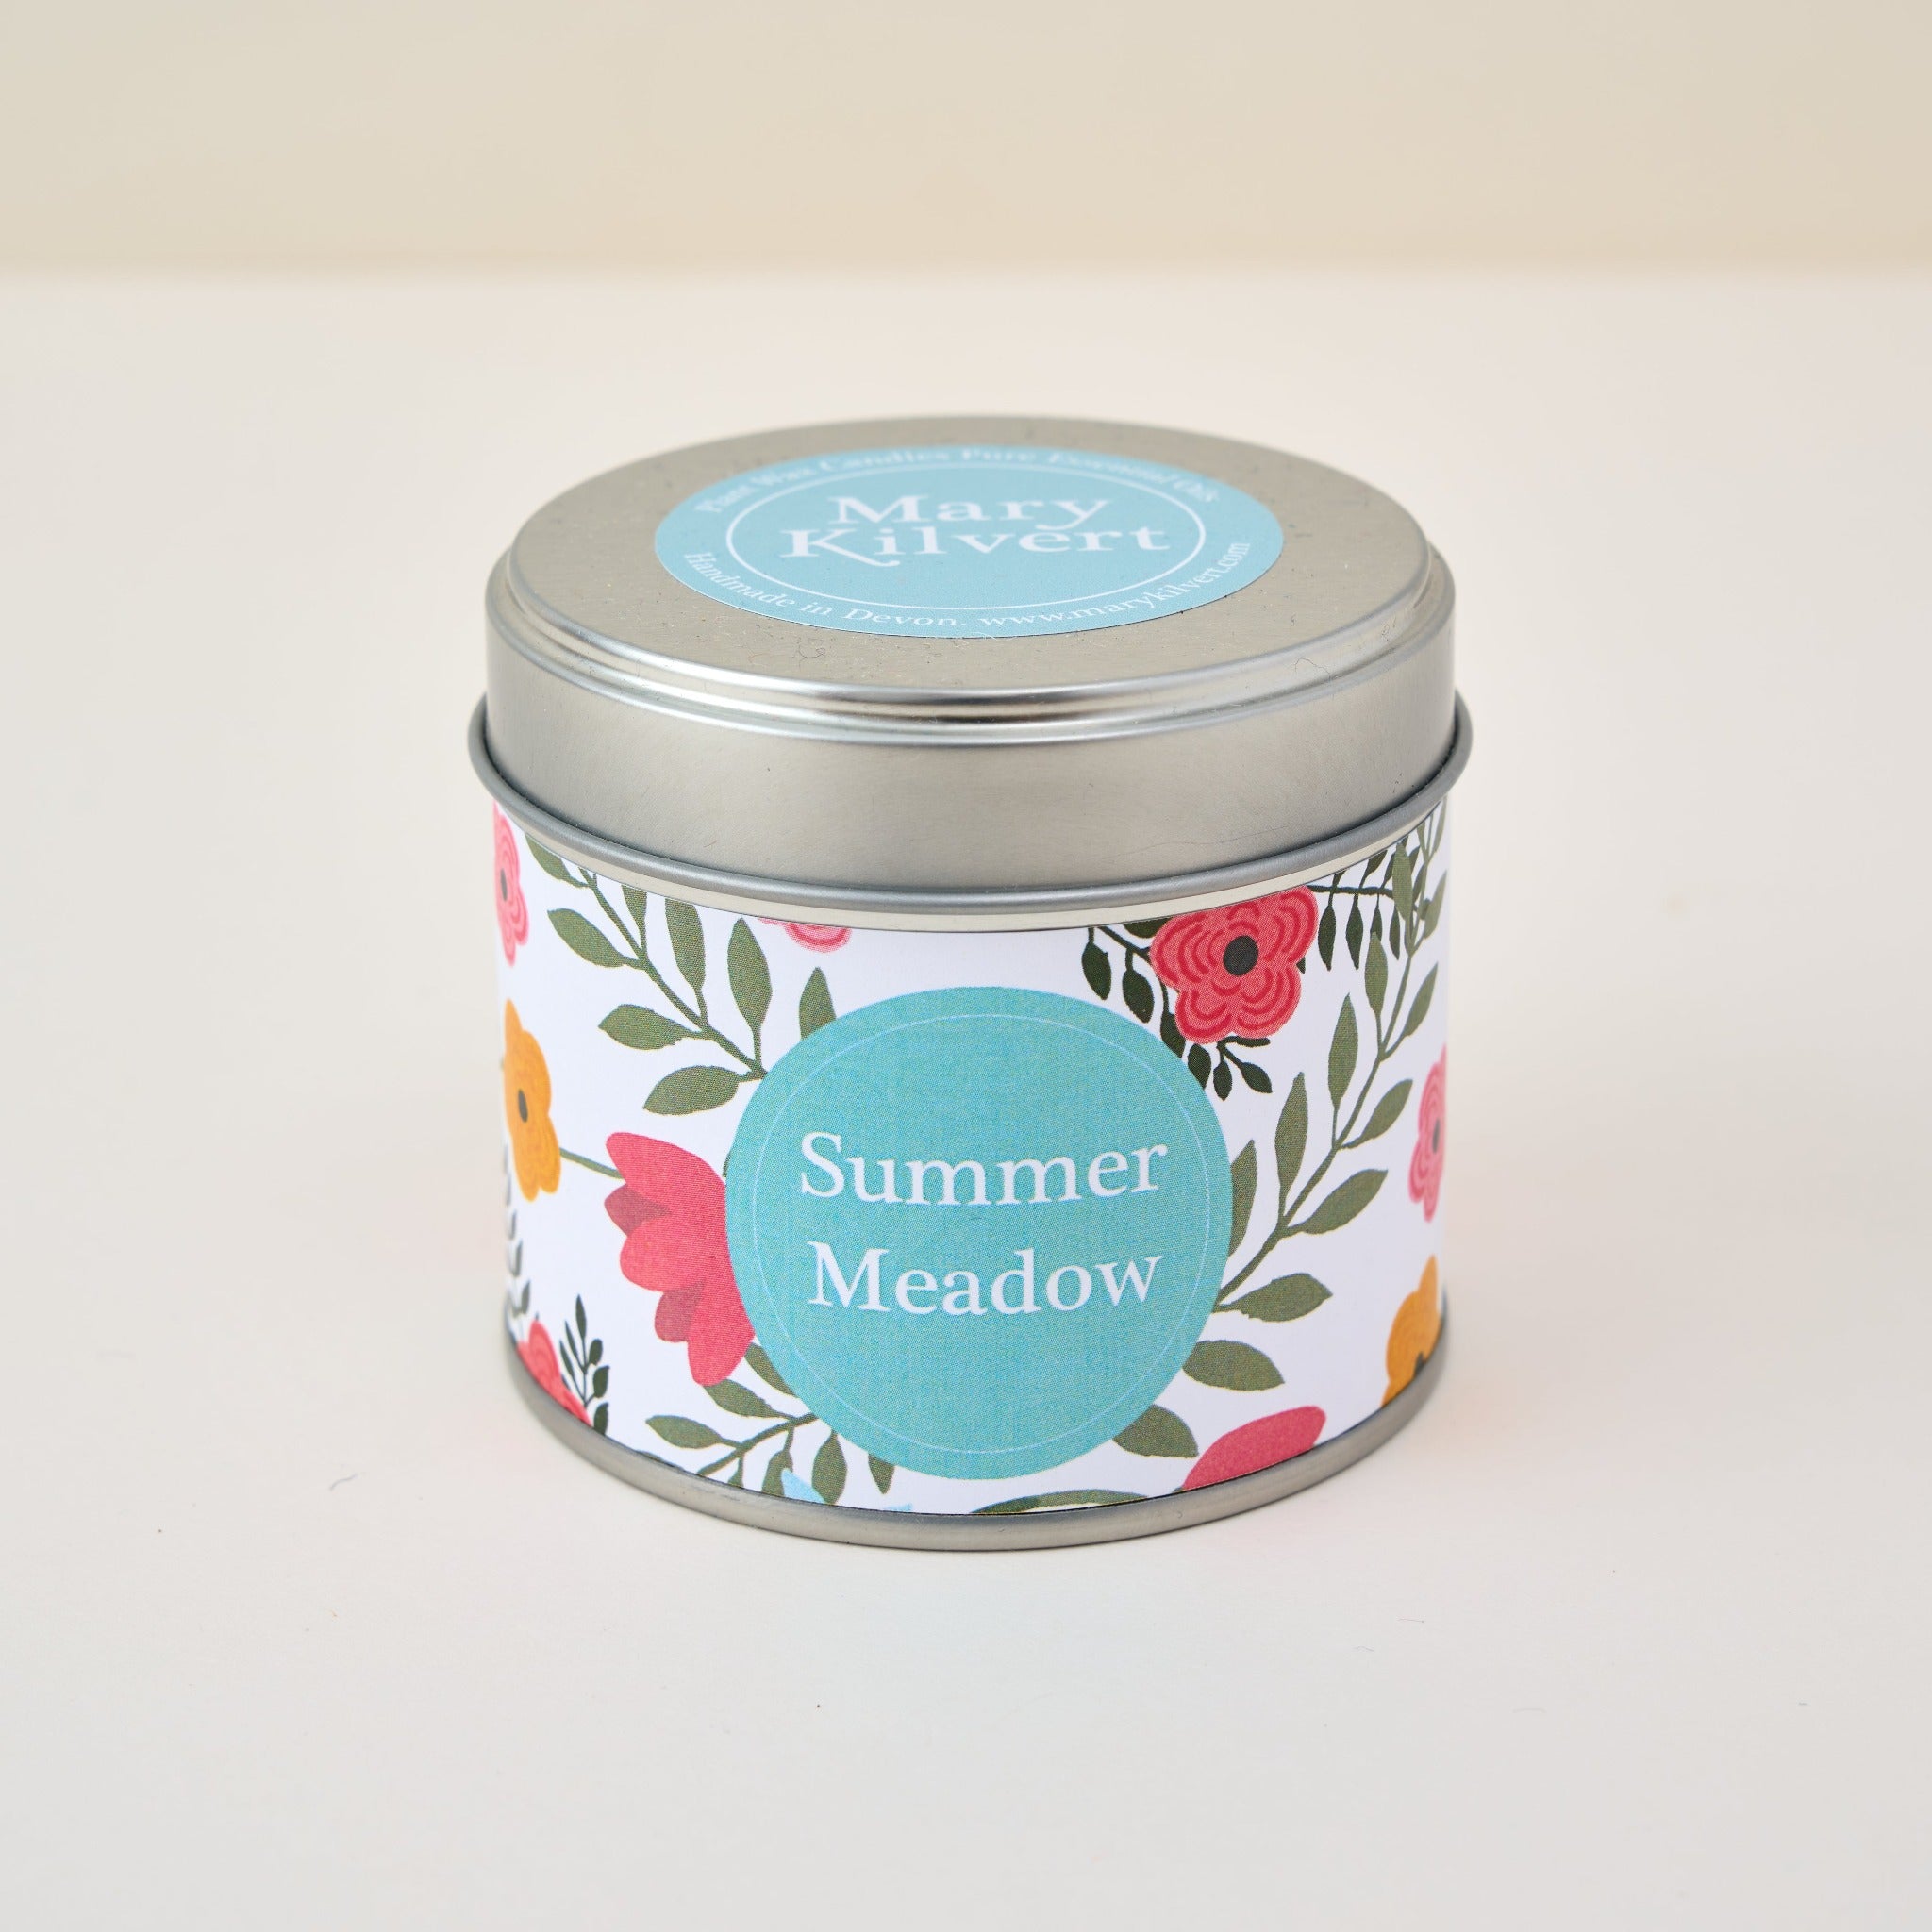 Summer Meadow Candle by Mary Kilvert